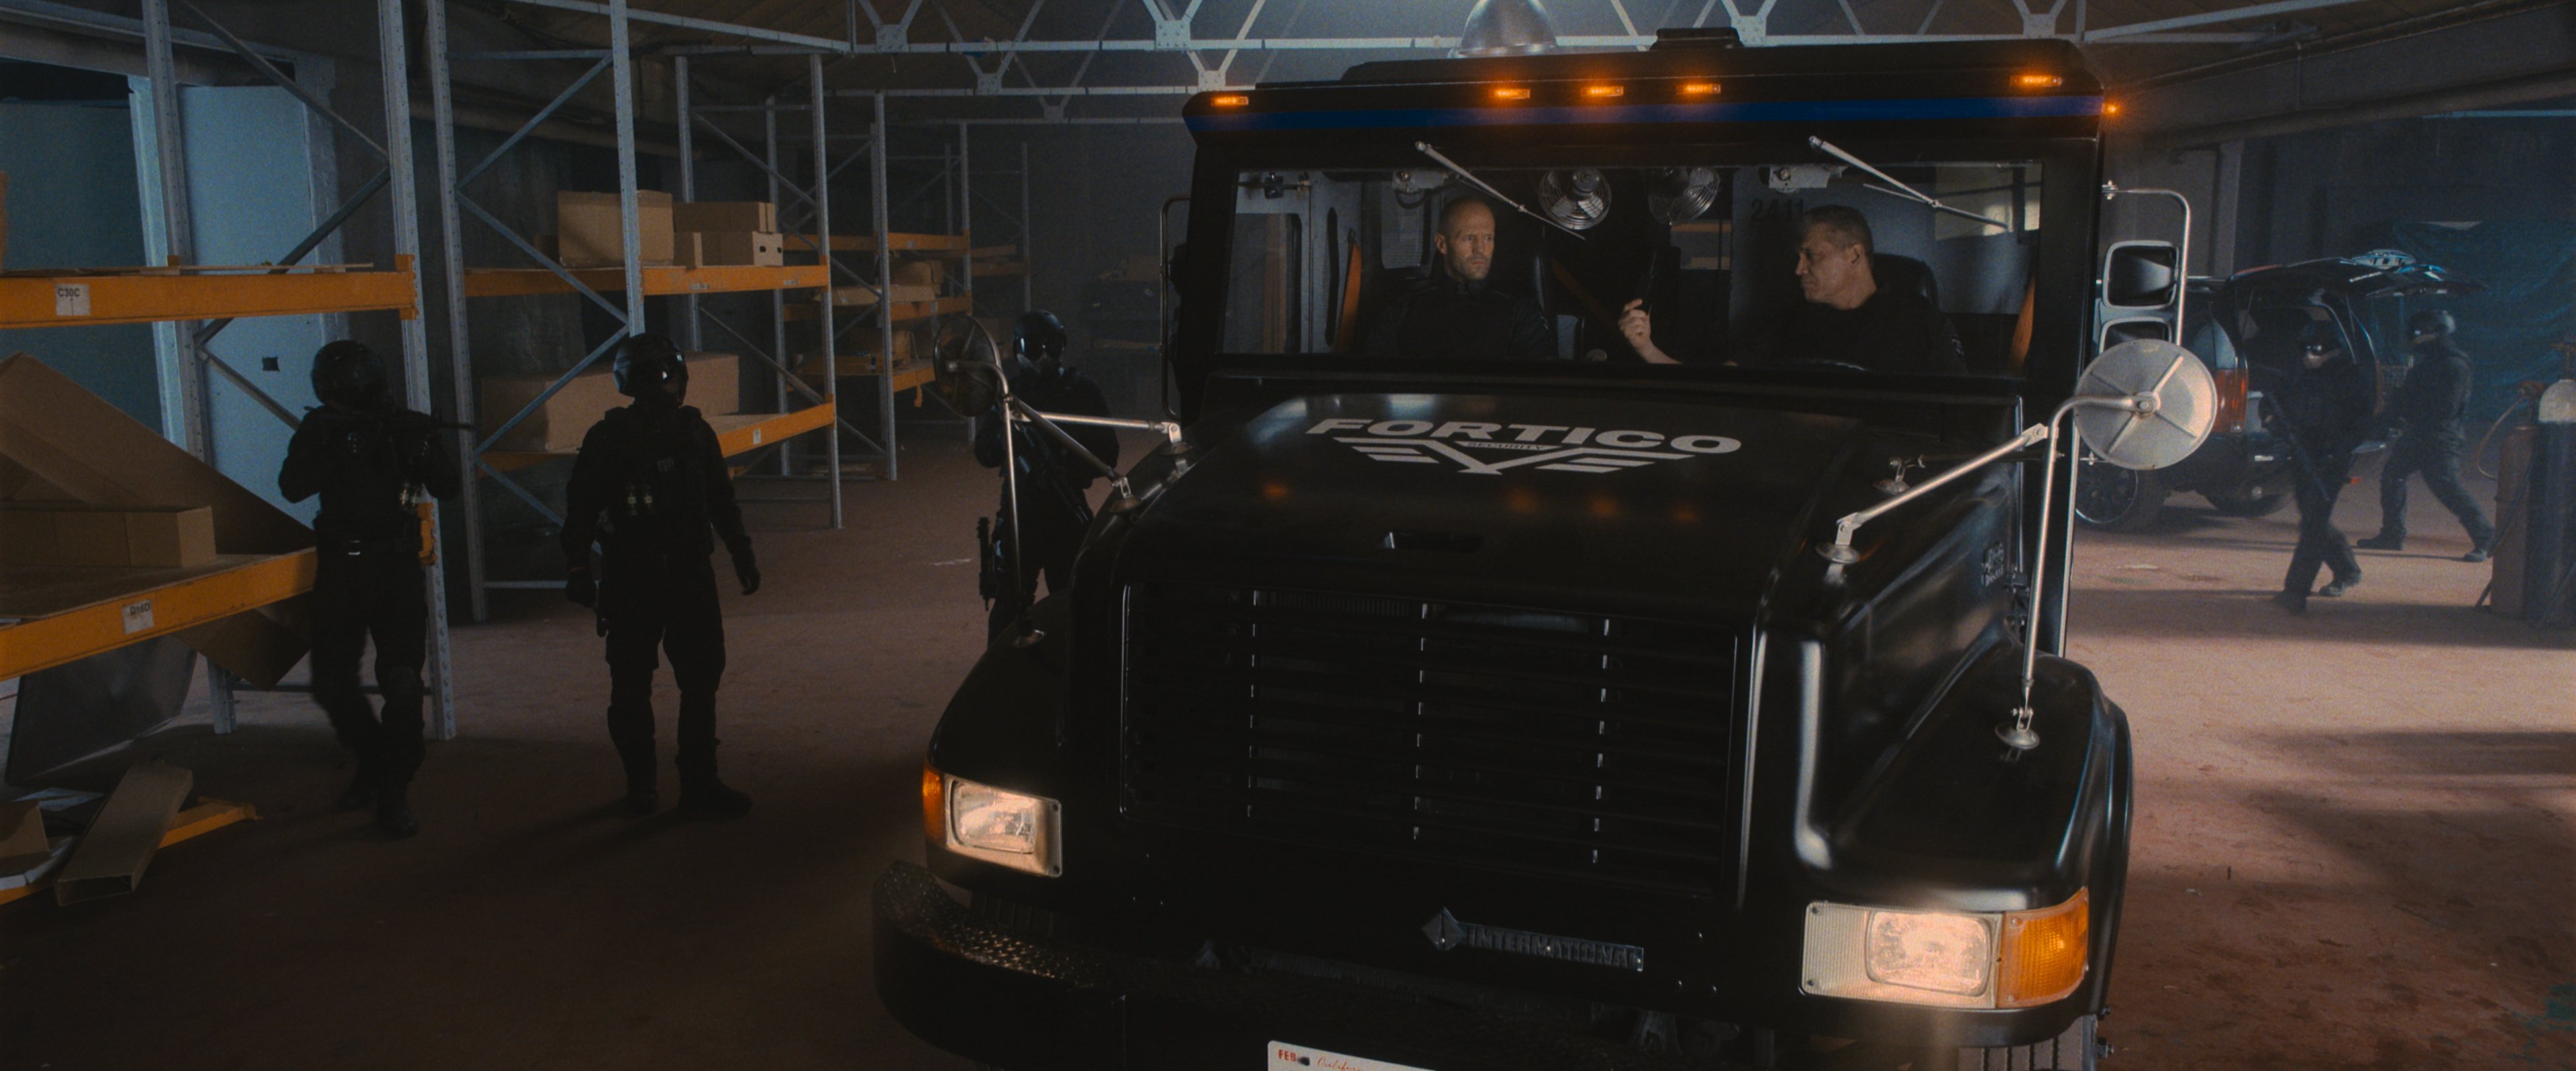 Jason Statham and Holt McAllany drive the truck in Wrath of Man